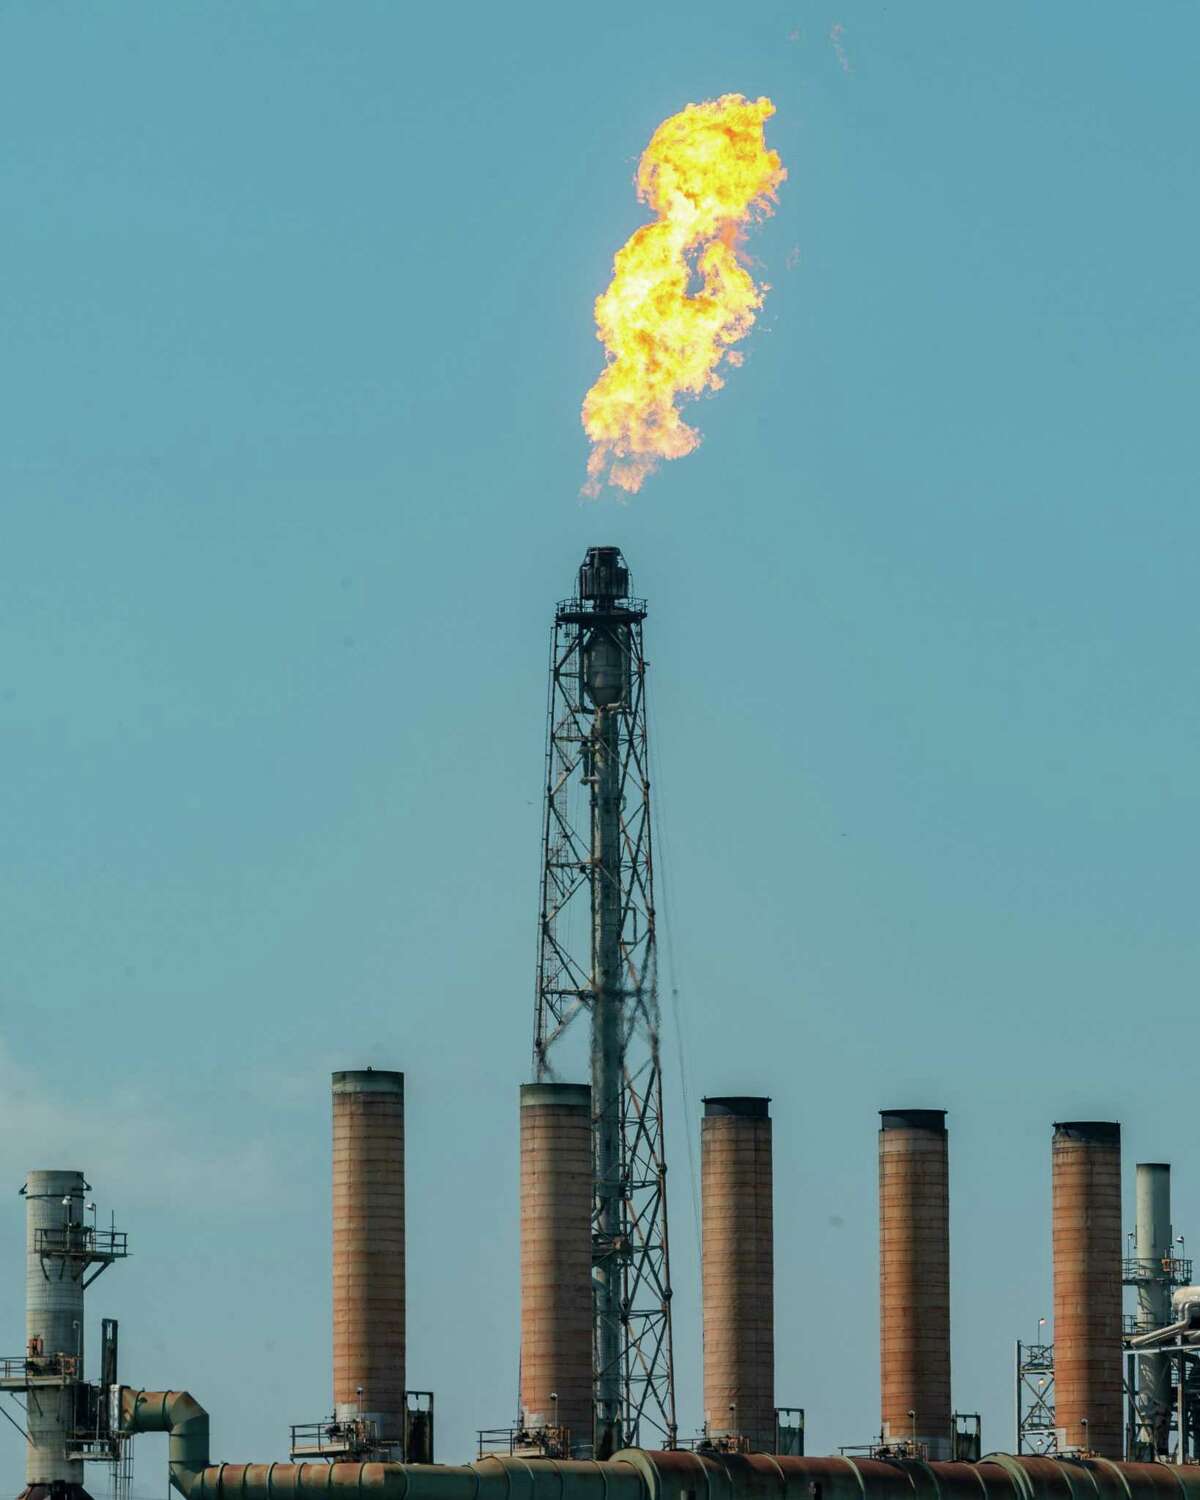 Over the weekend, flaring was a problem at some of the area plants like this one at Chevron Phillips in Port Arthur. Photo made on October 12, 2020. Fran Ruchalski/The Enterprise